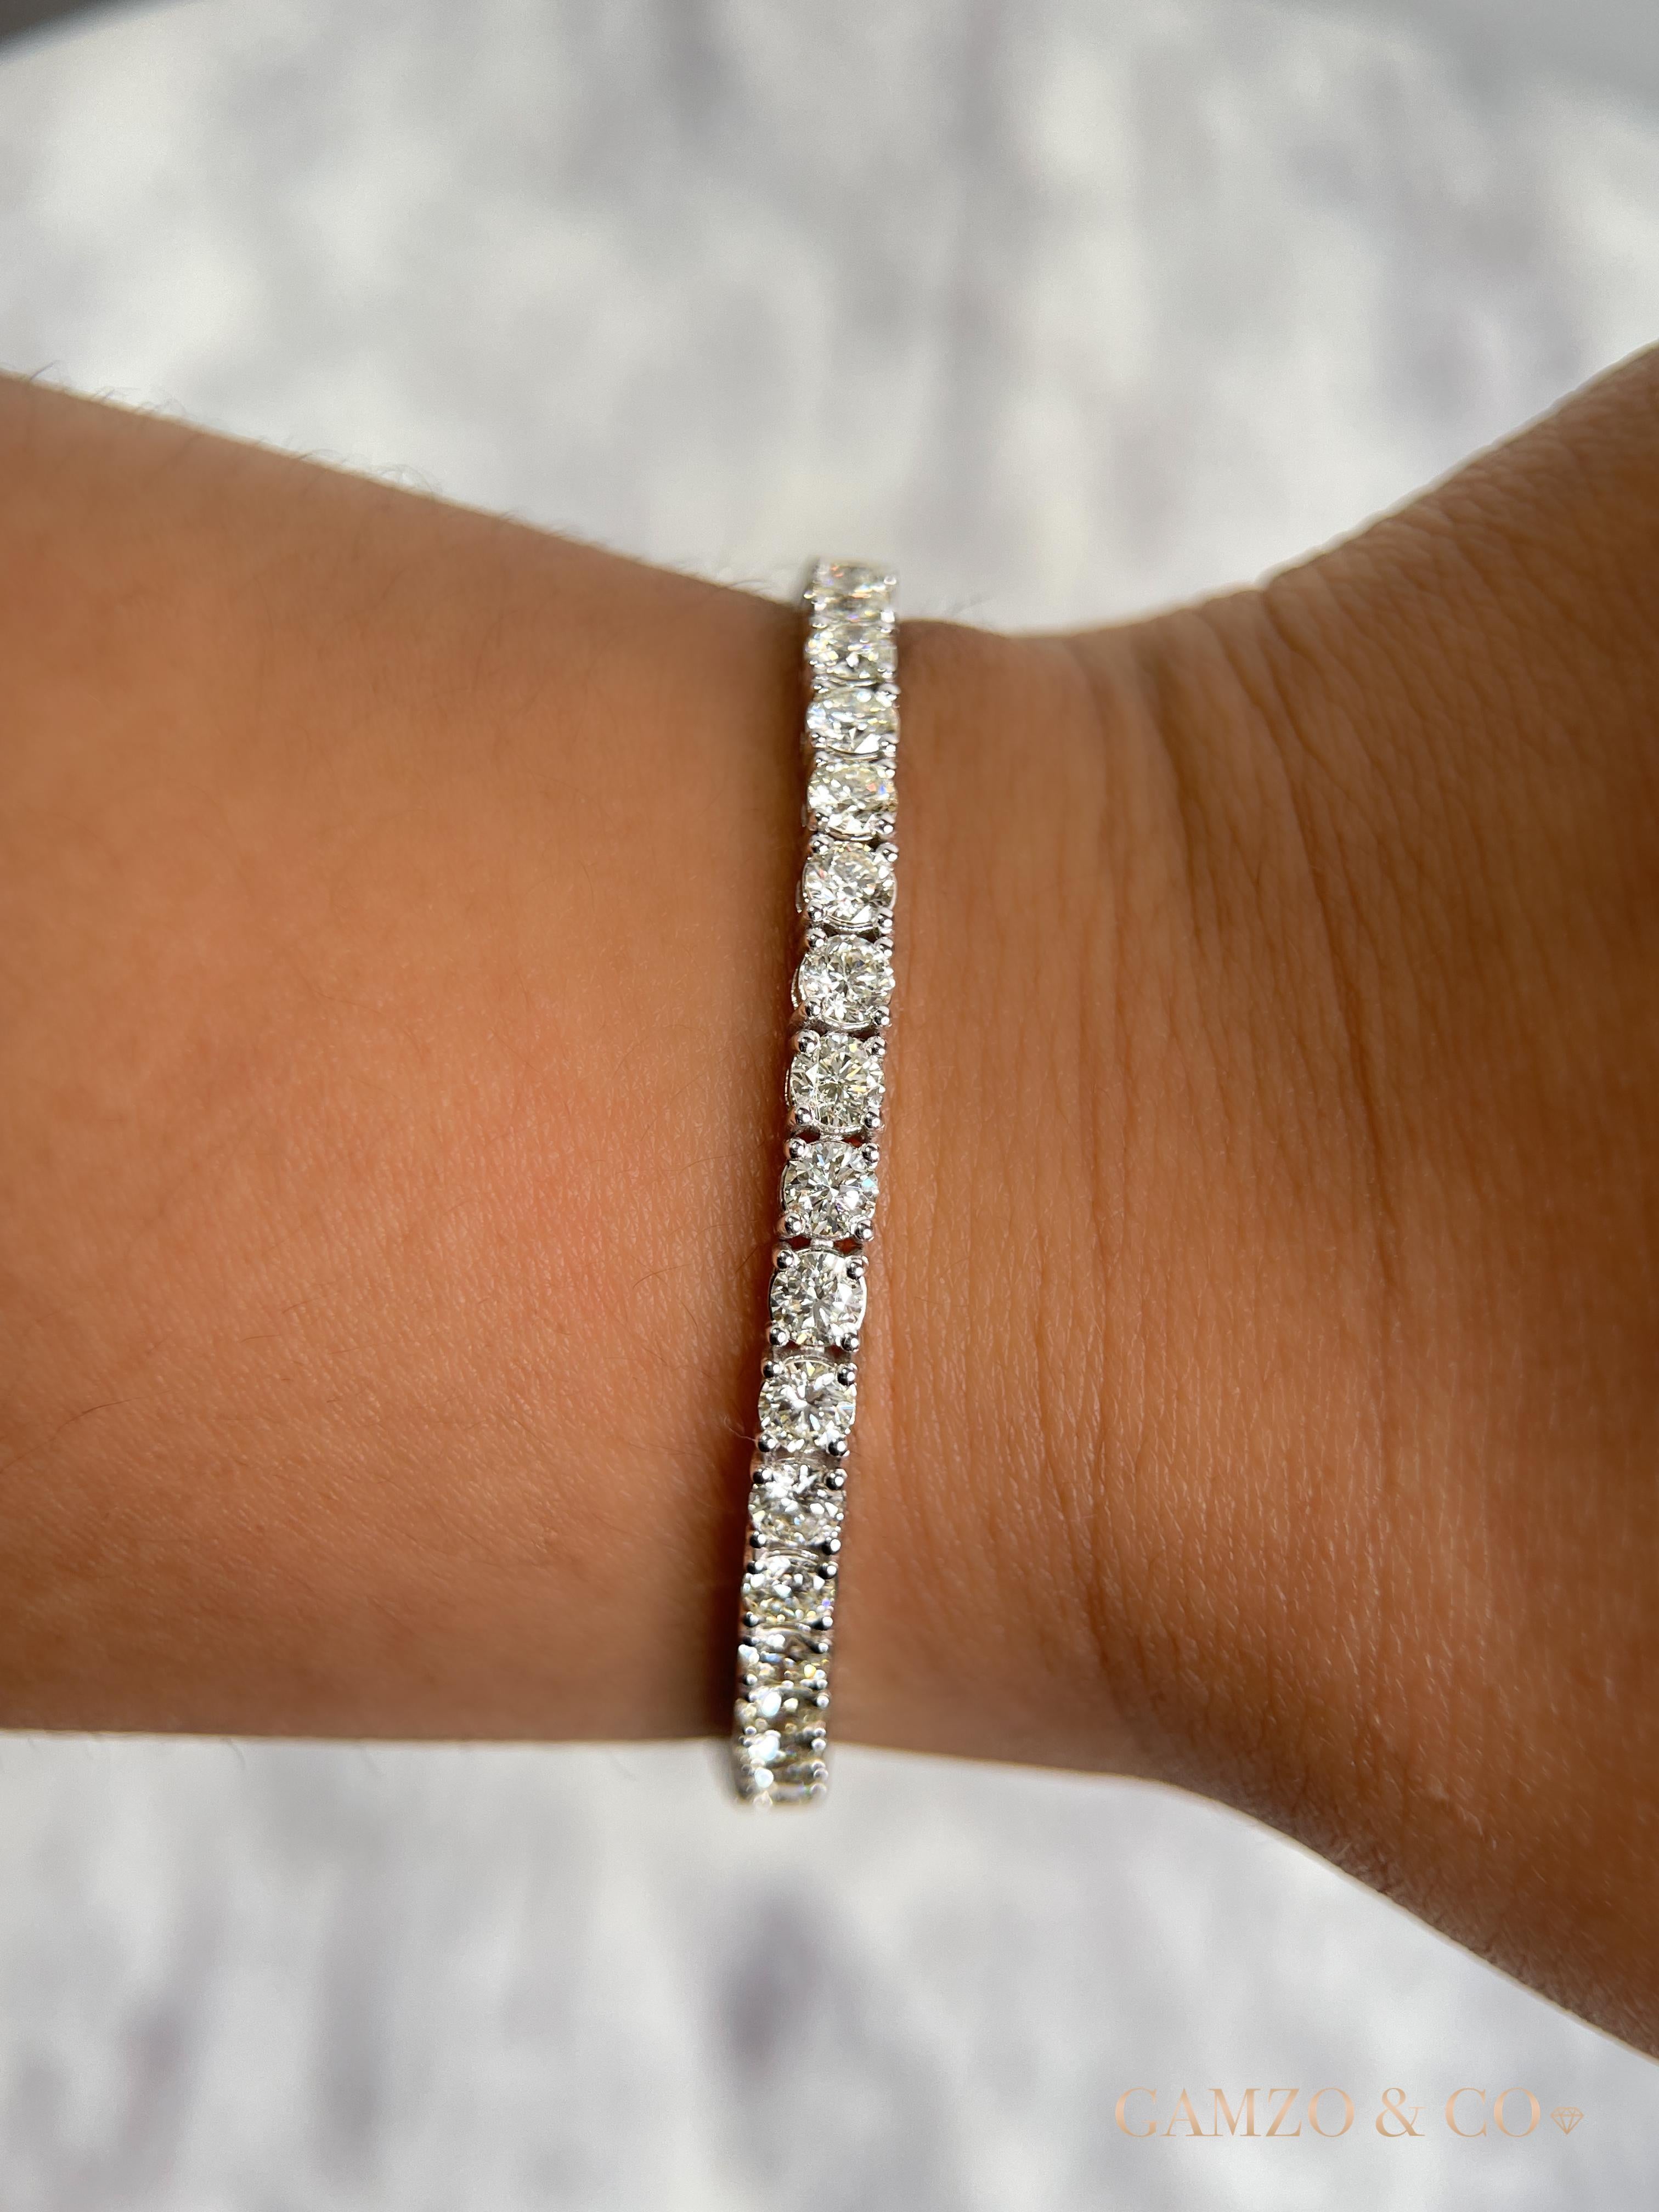 This diamond tennis bracelet features beautifully cut round diamonds set gorgeously in 14k gold.

Metal: 14k Gold
Diamond Cut: Round Natural Diamond 
Total Diamond Carats: 12ct
Diamond Clarity: VS
Diamond Color: F-G
Color: Rose Gold
Bracelet Length: